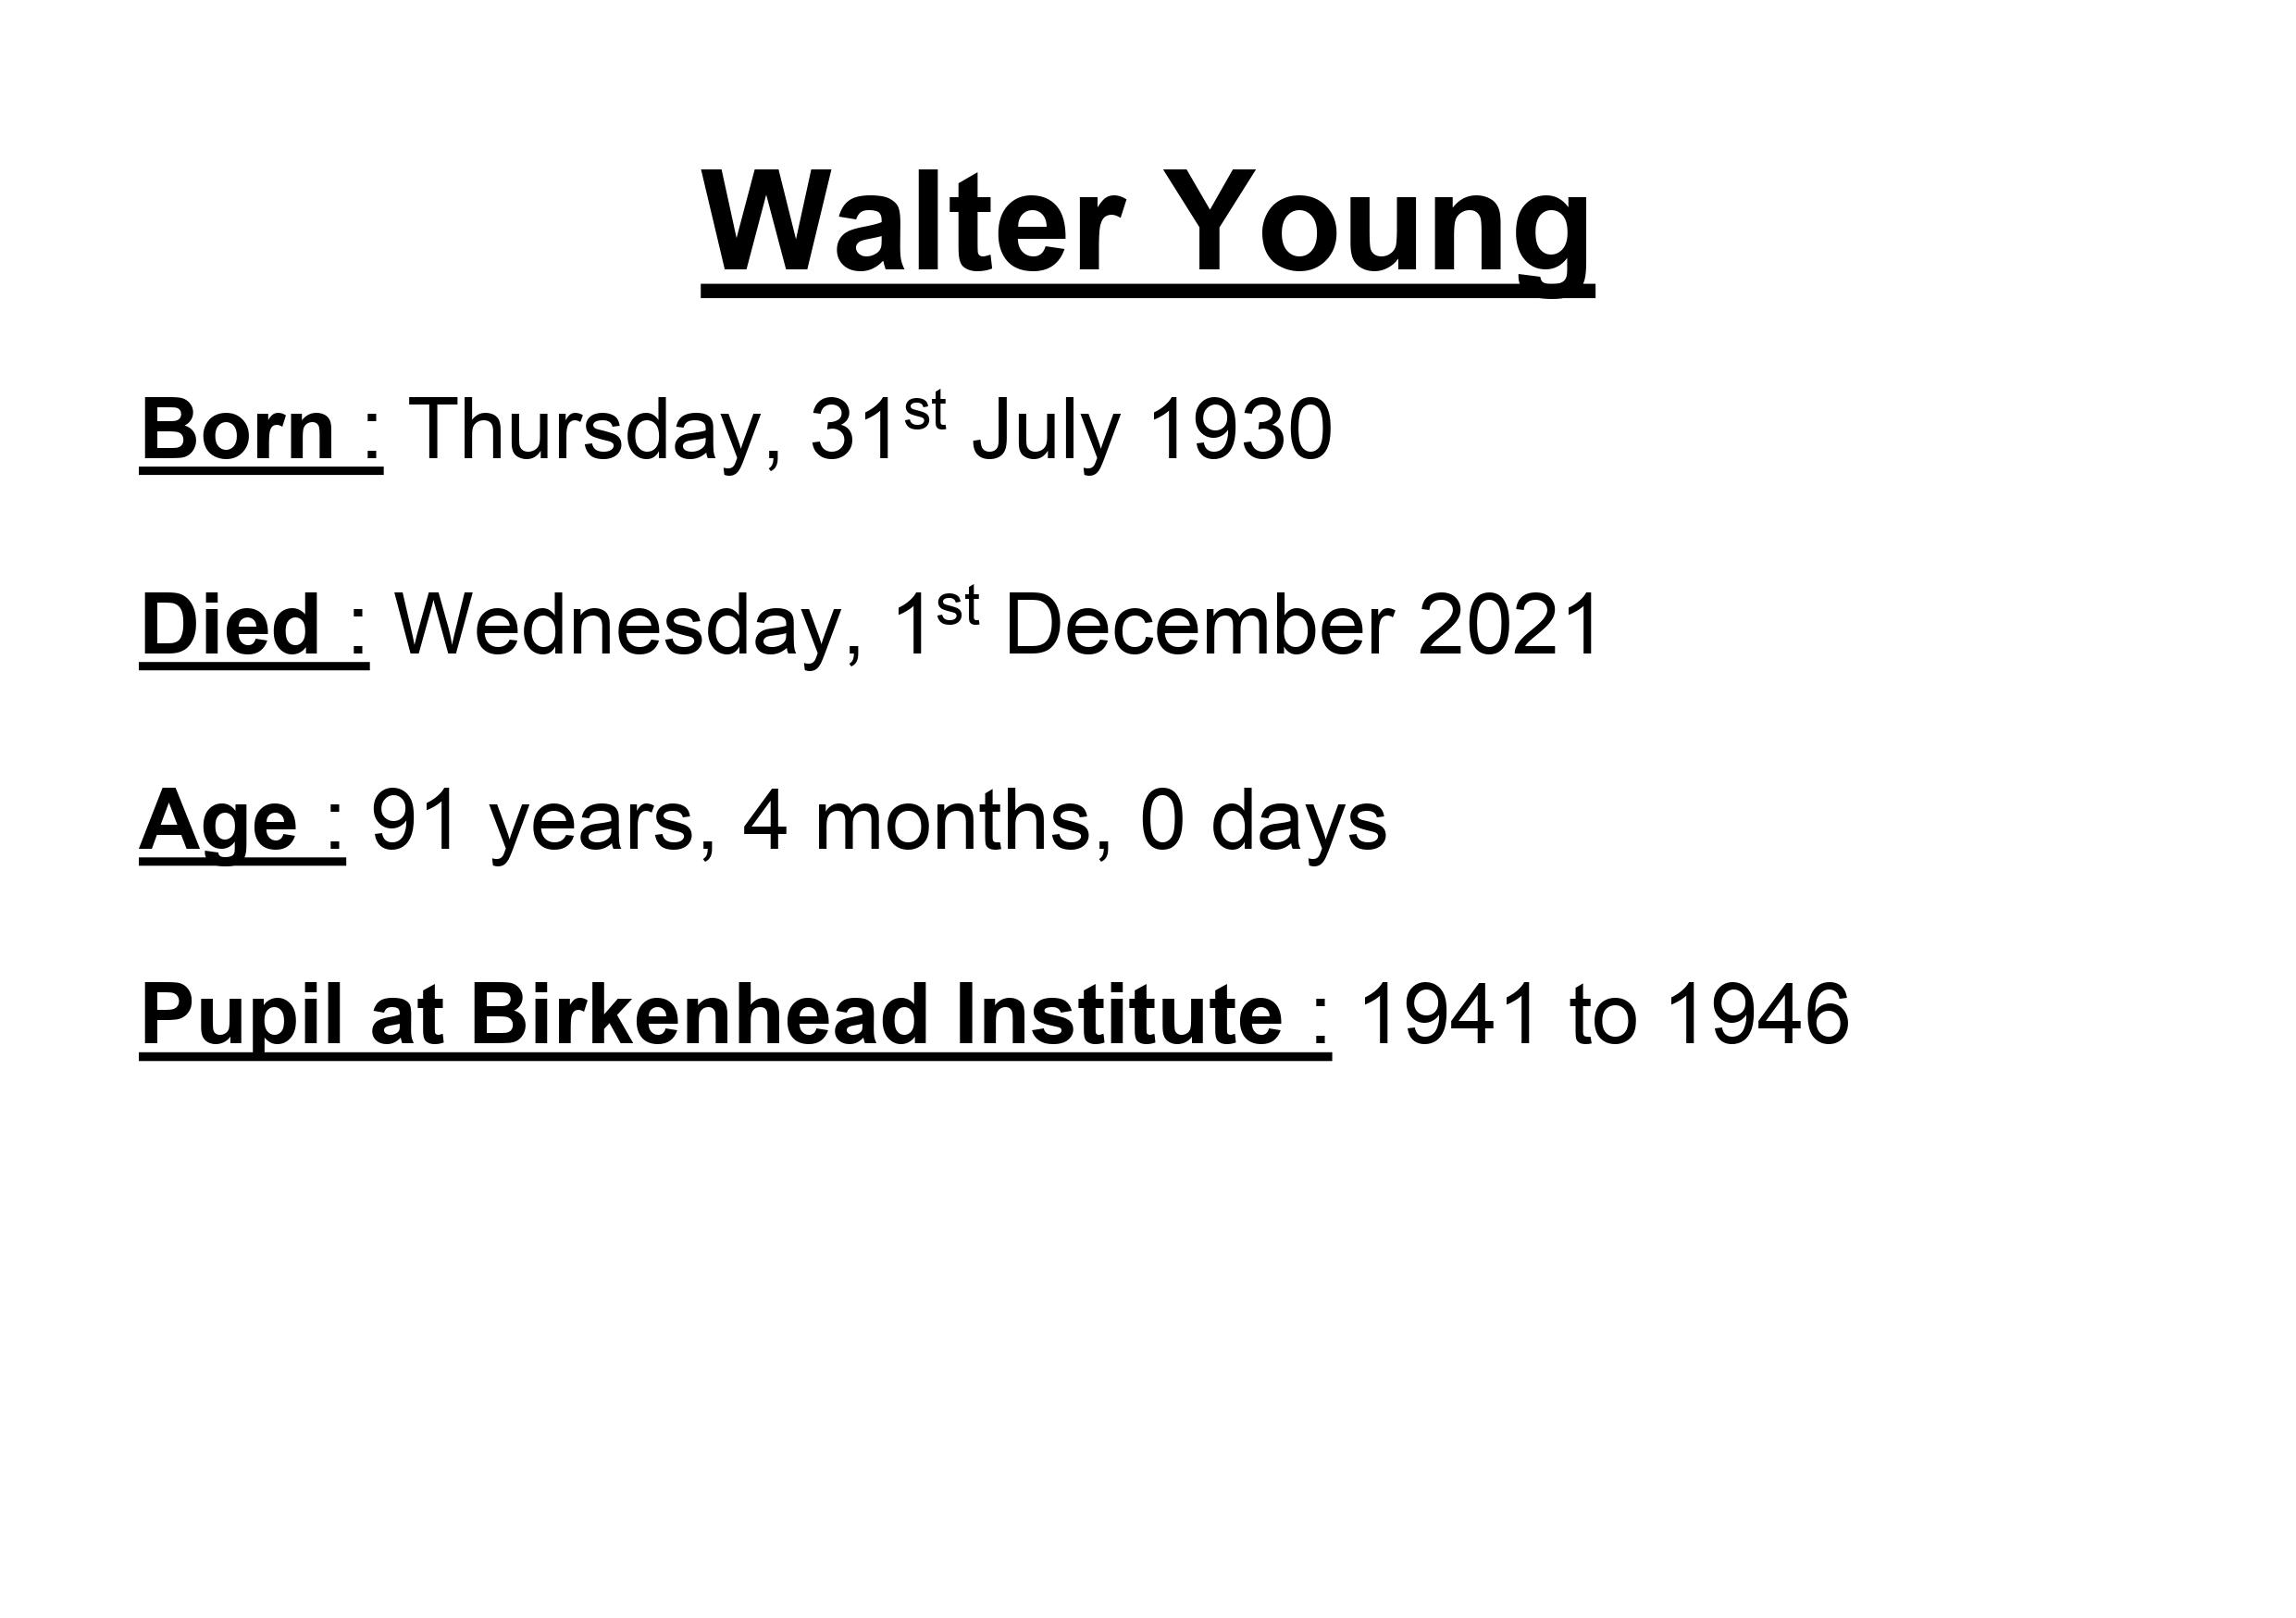 Walter Young